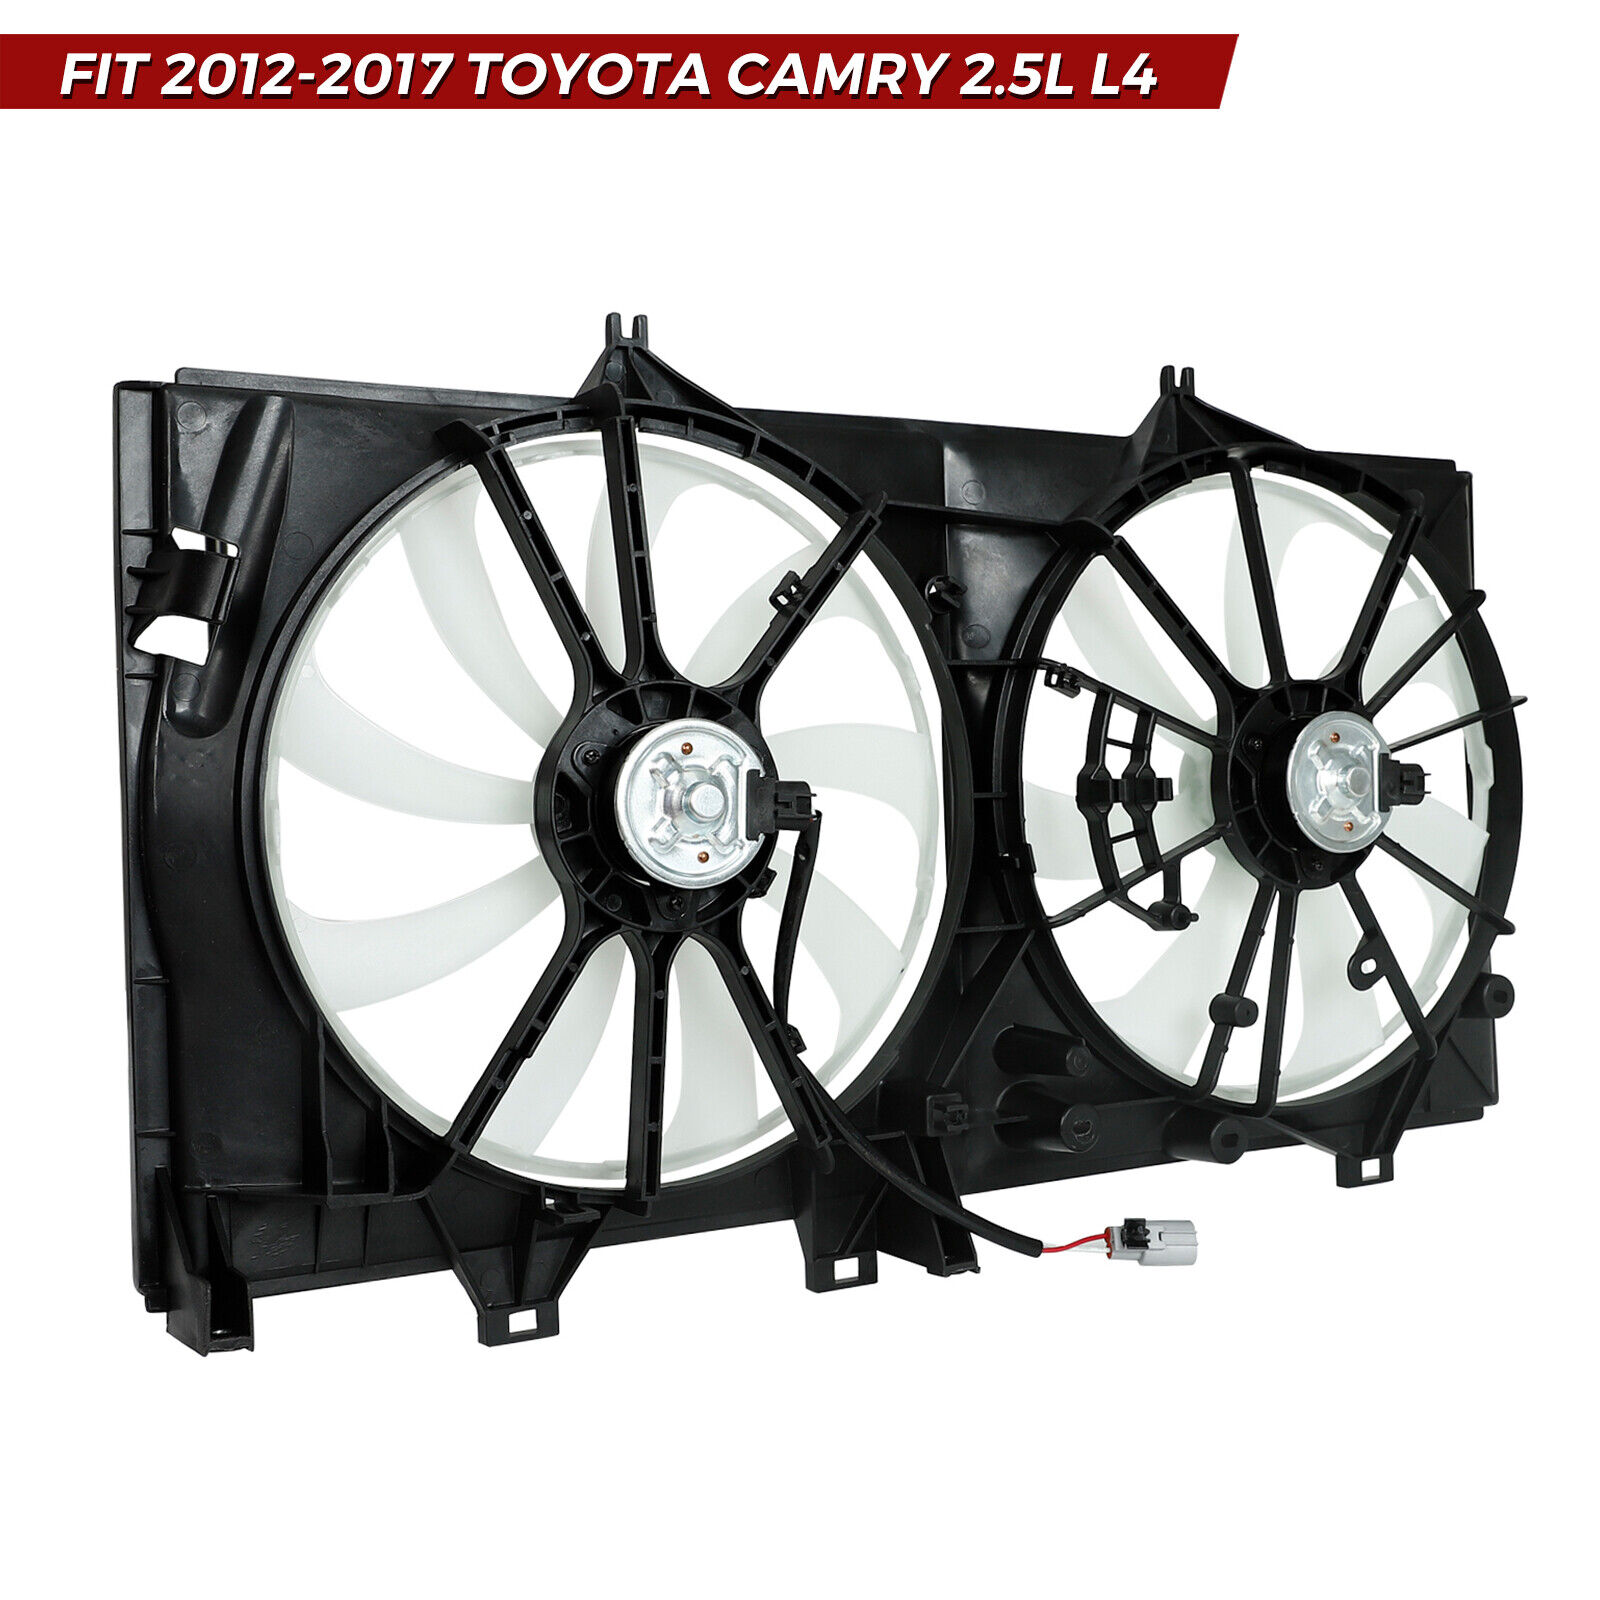 AC Dual Condenser Radiator Cooling Engine Fan For 2012-2017 Toyota Camry 2.5L L4